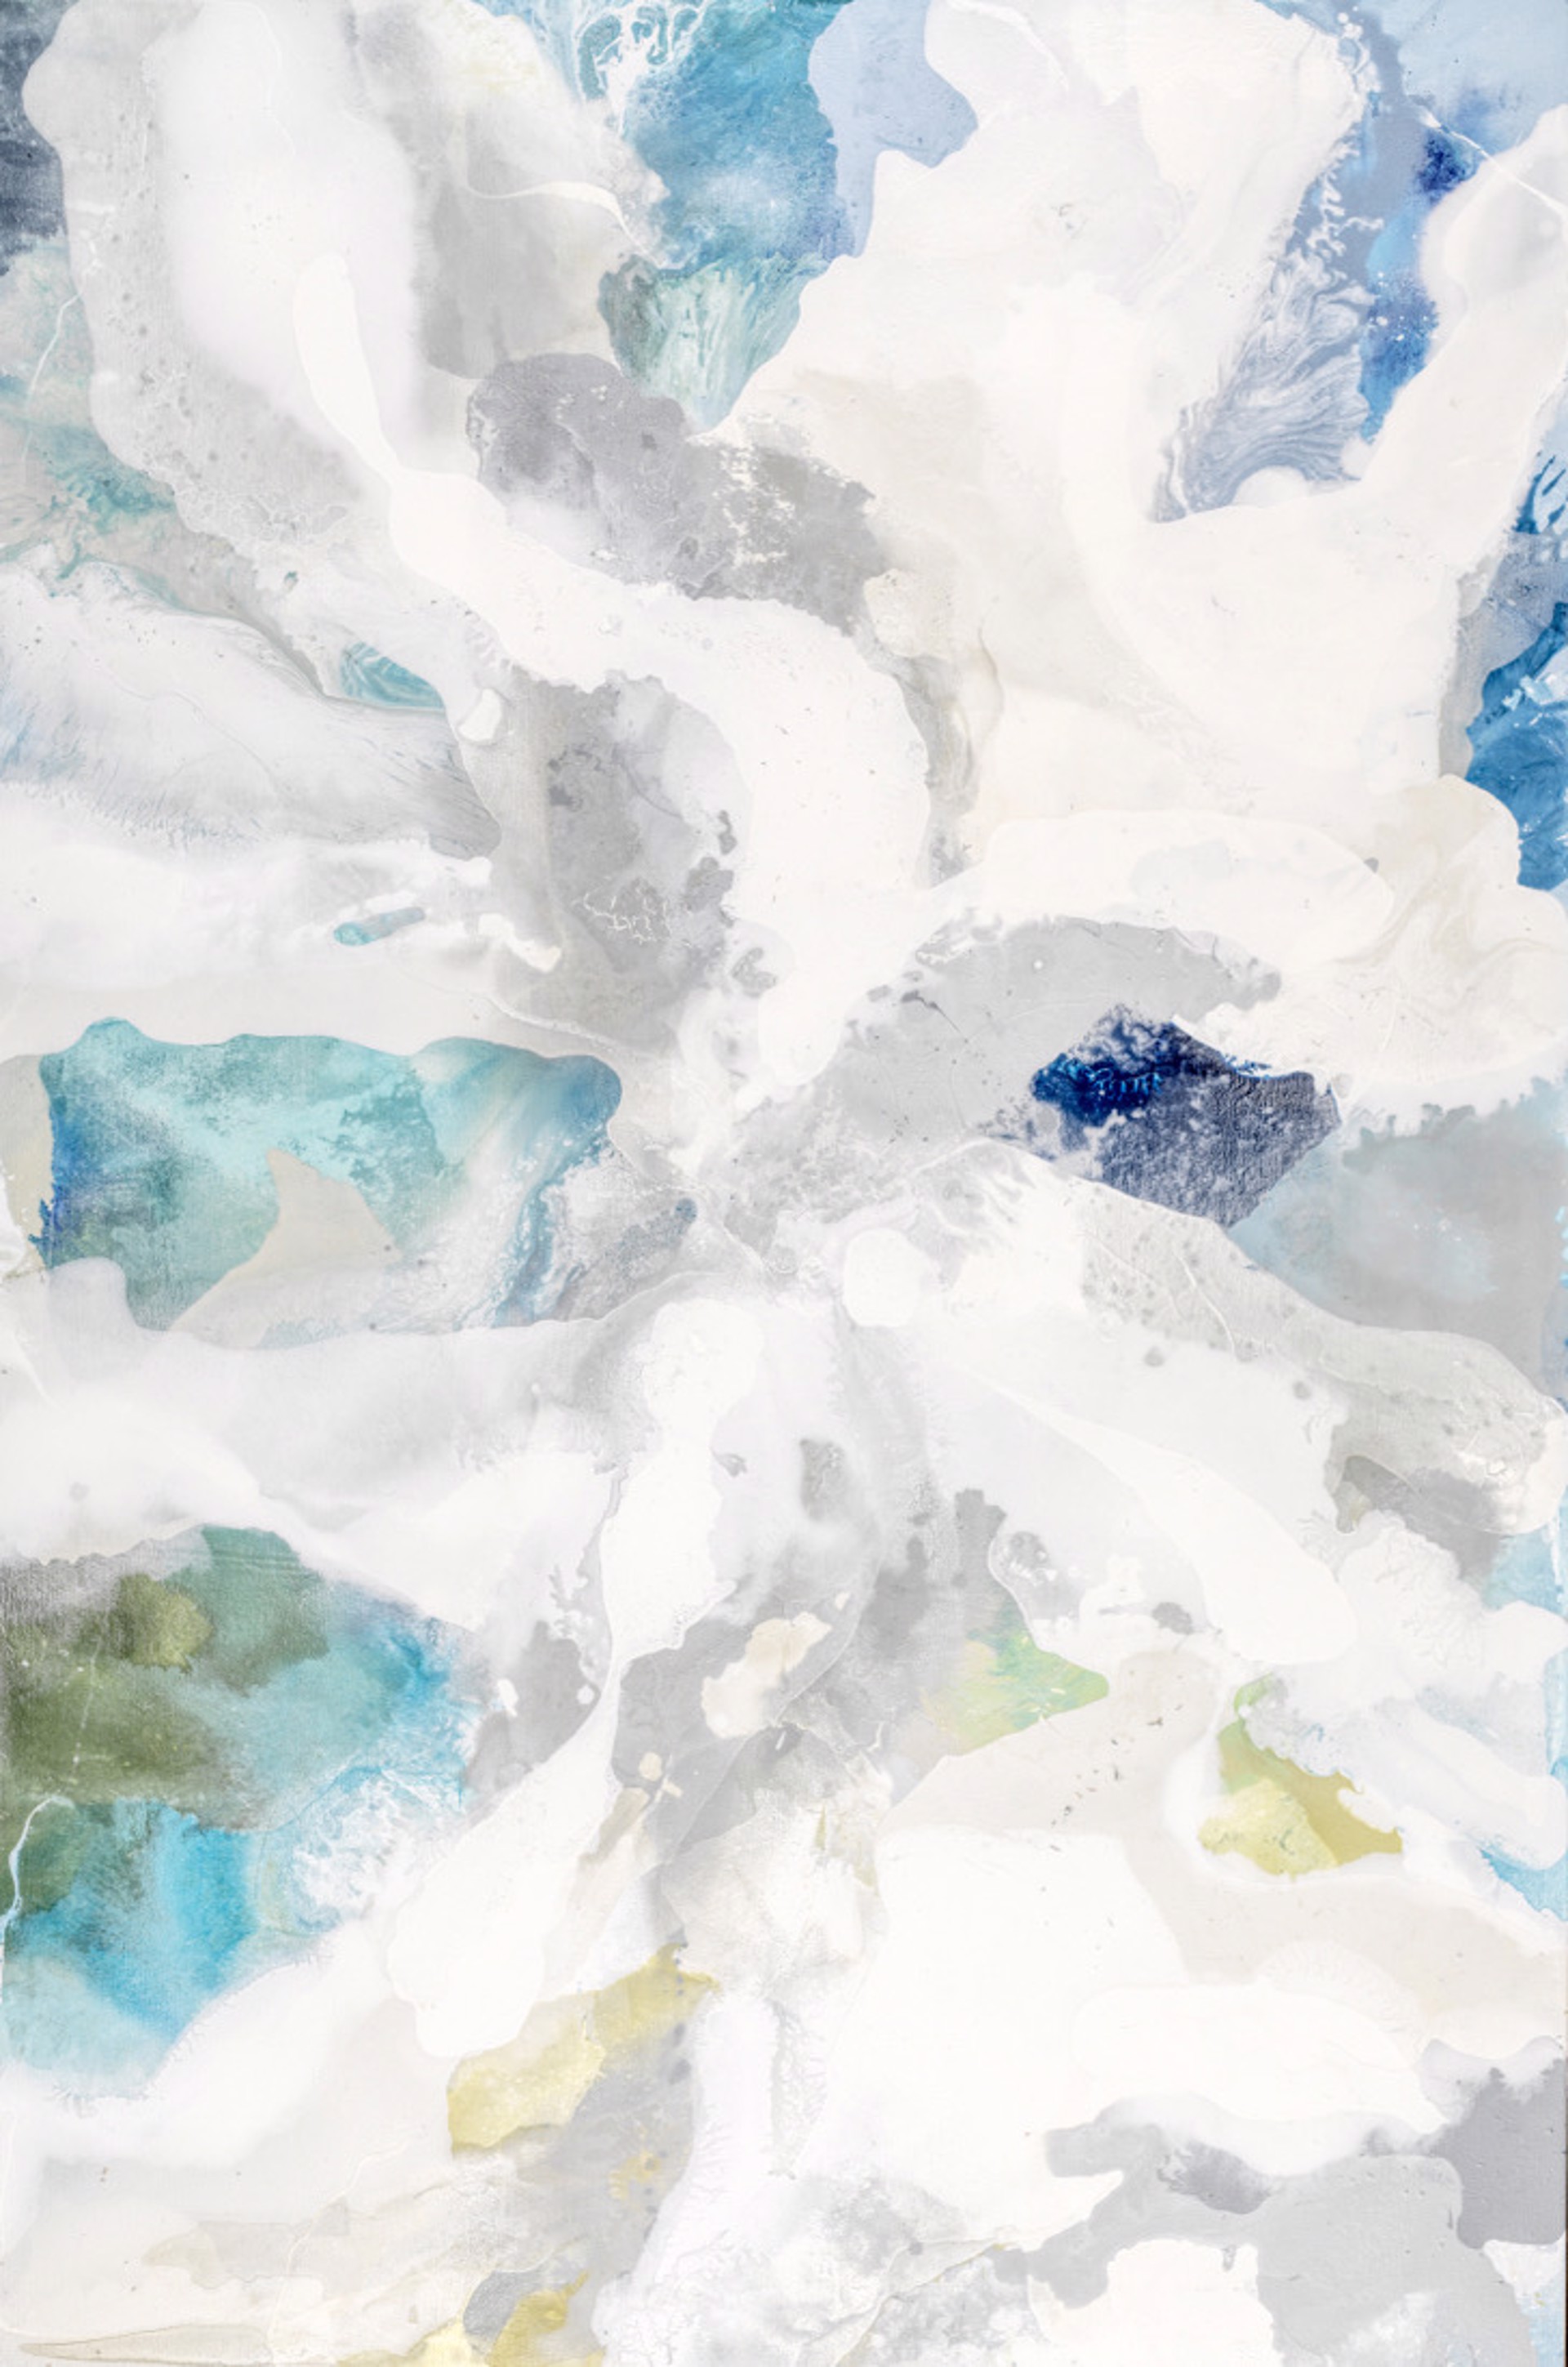 An abstract painting featuring blues, whites, greens and yellows clouds by John Schuyler